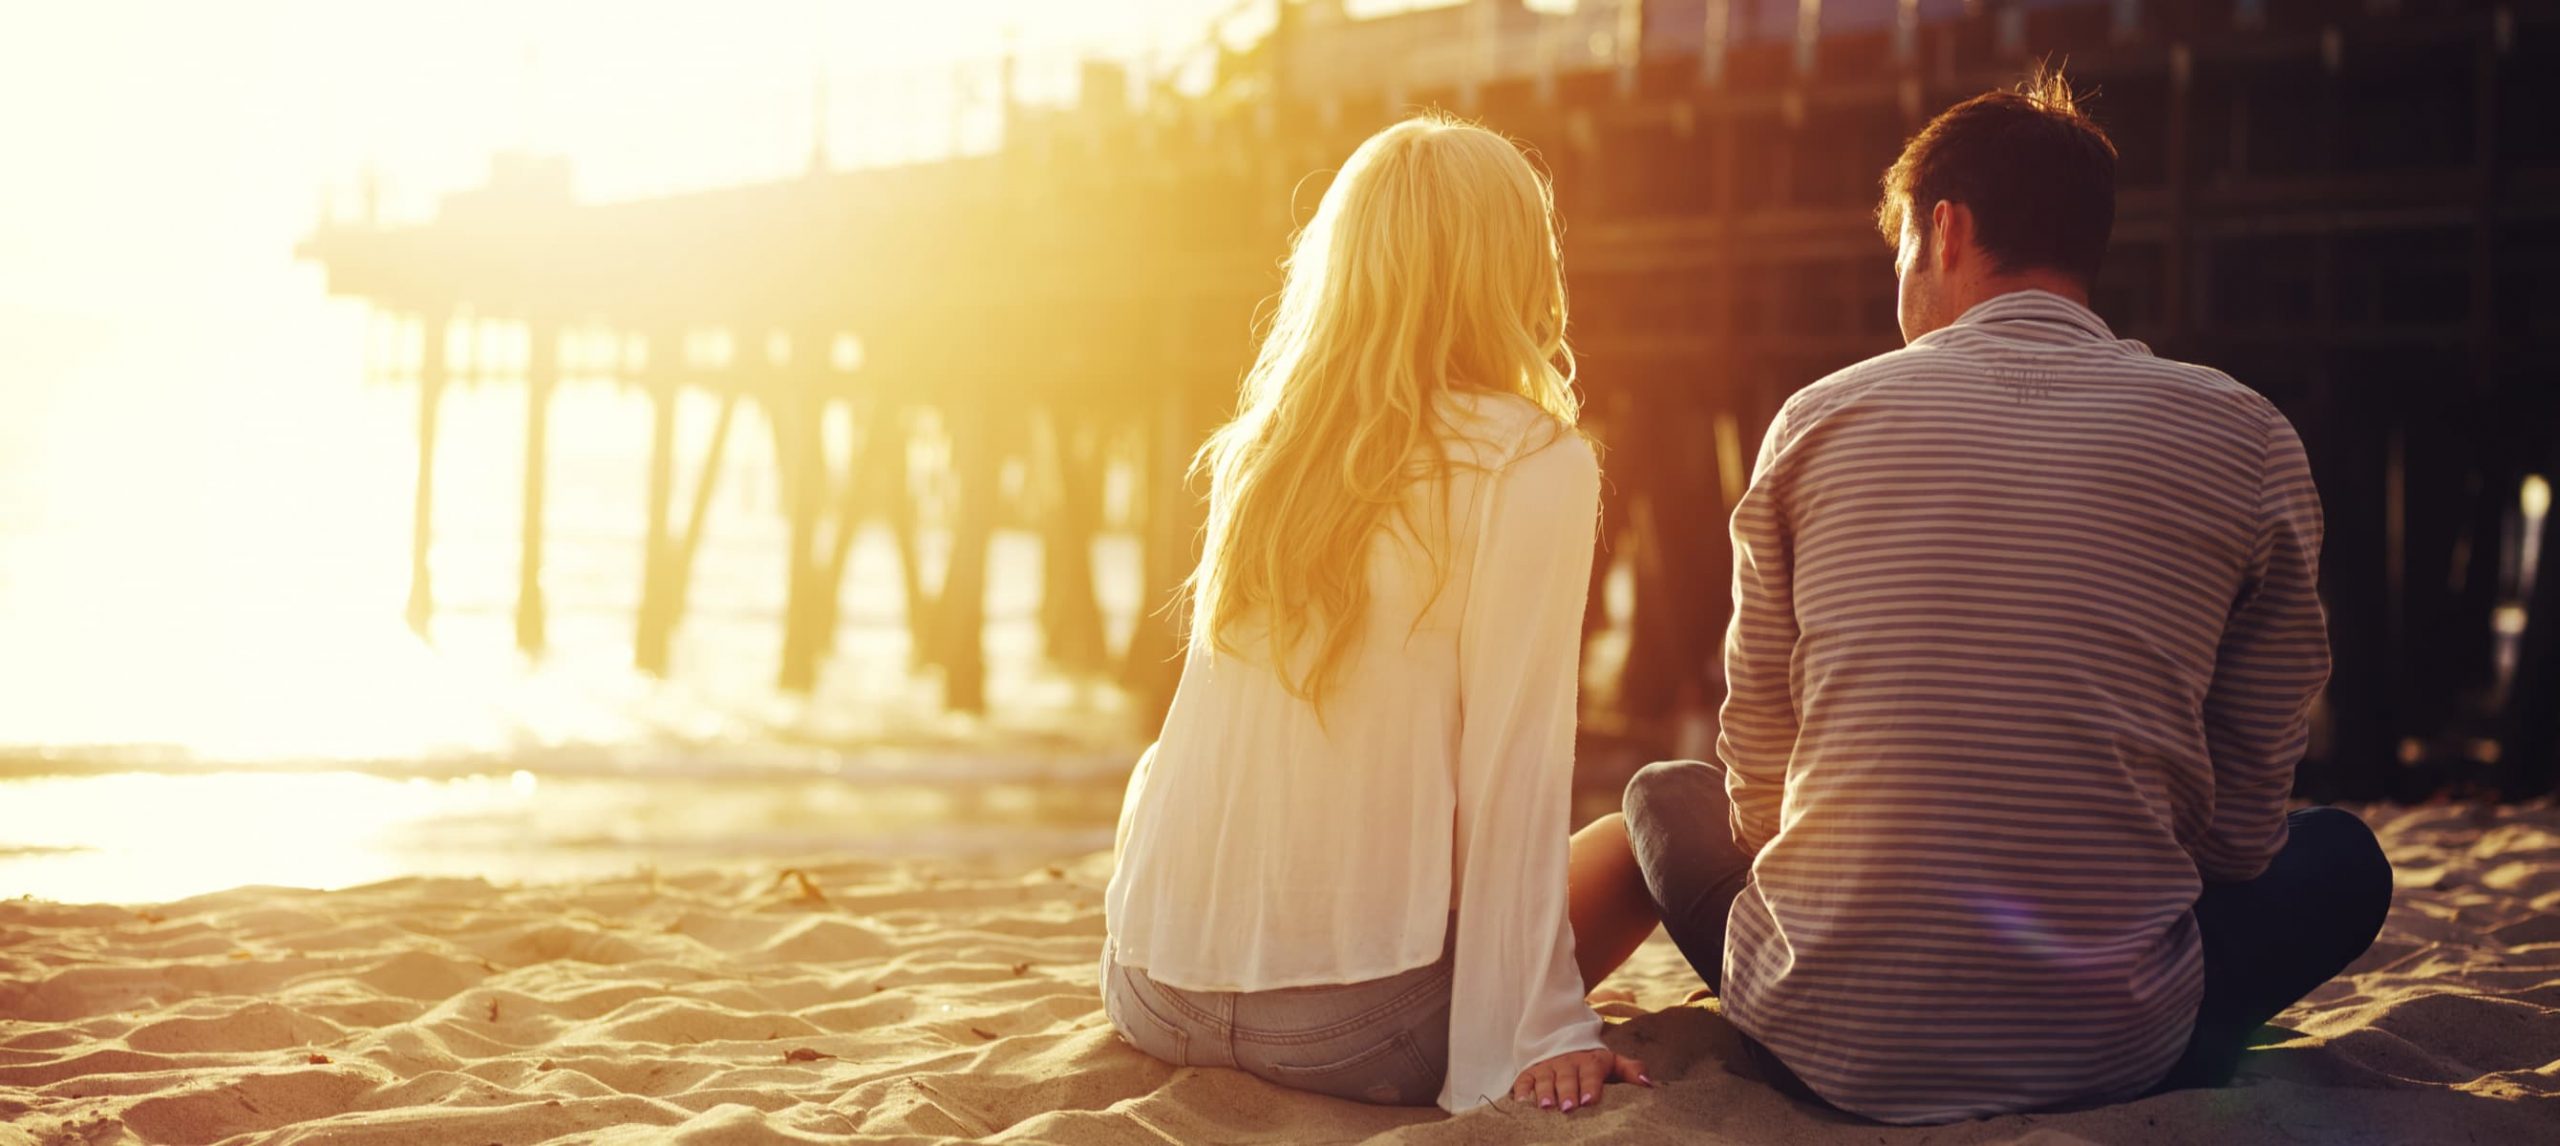 Romantic couple sitting together by the beach with sunset